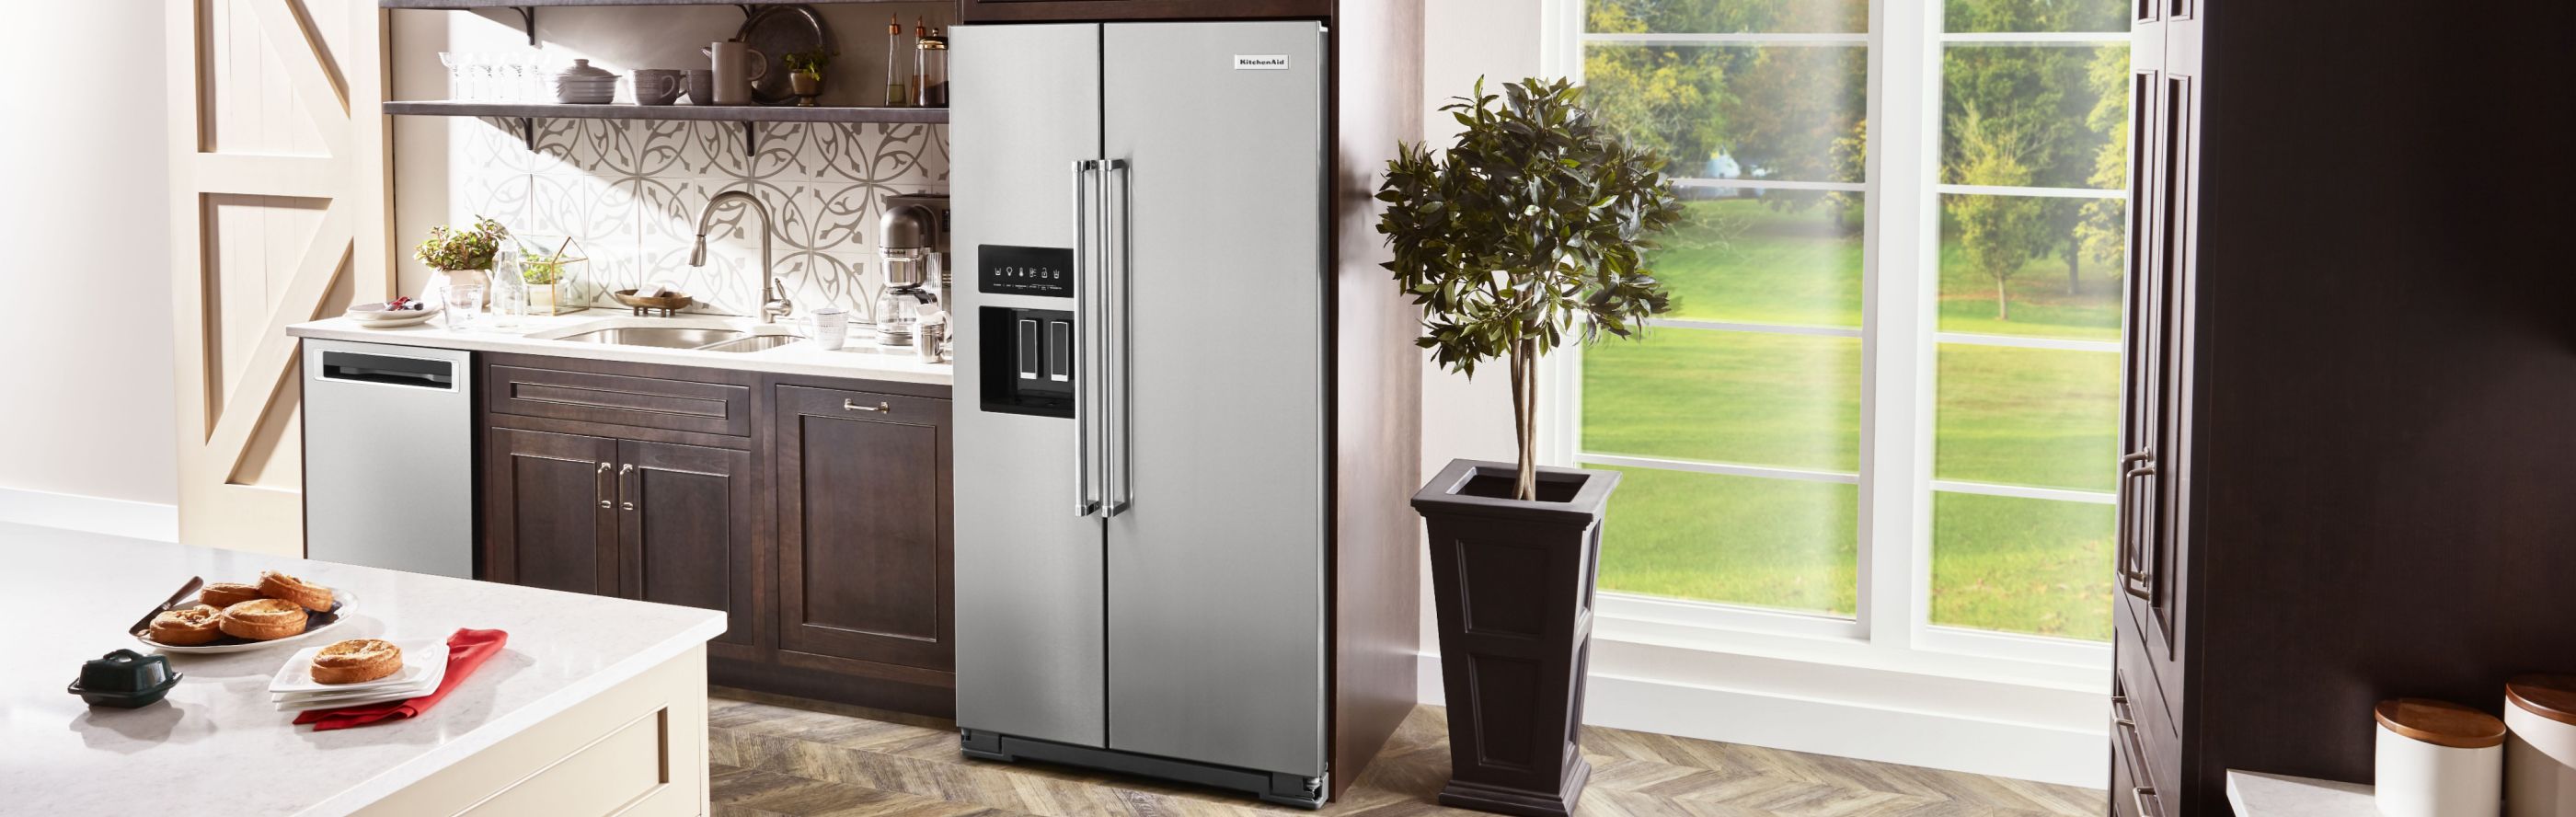 KitchenAid® side-by-side refrigerator in brown cabinetry 